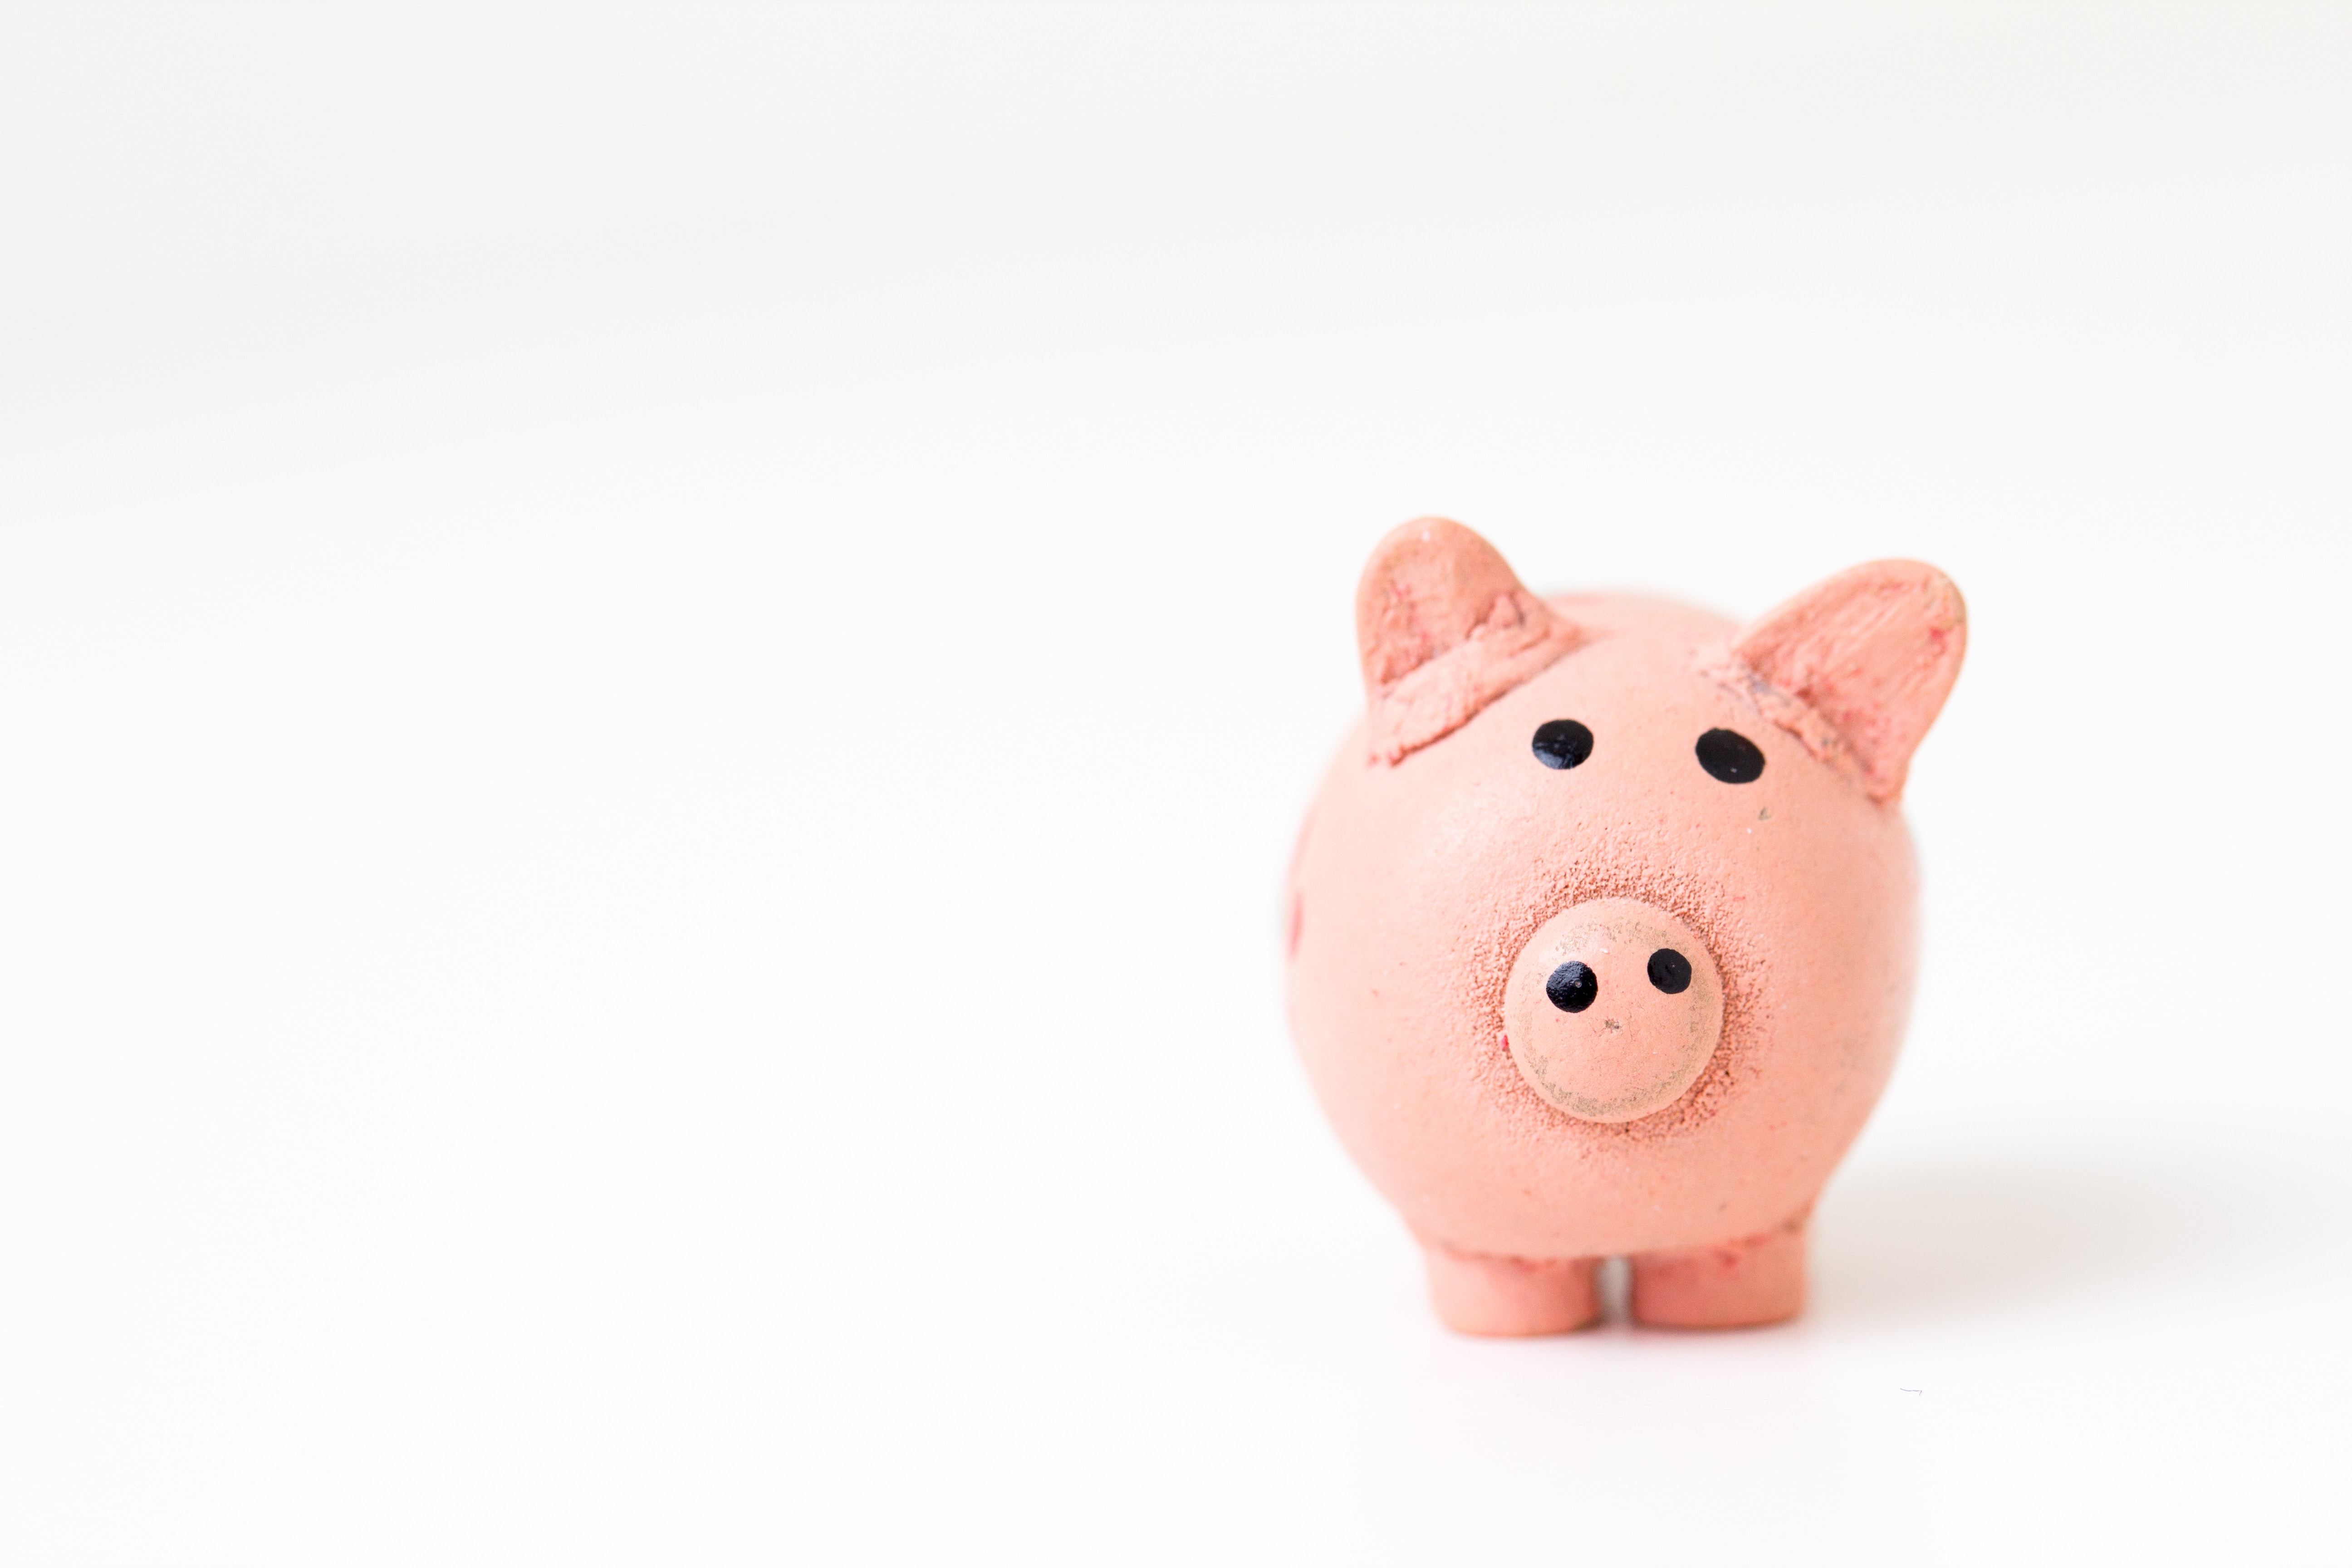 Photo by Fabian Blank - Piggy Bank on White Background | Personal Finance for Entrepreneurs